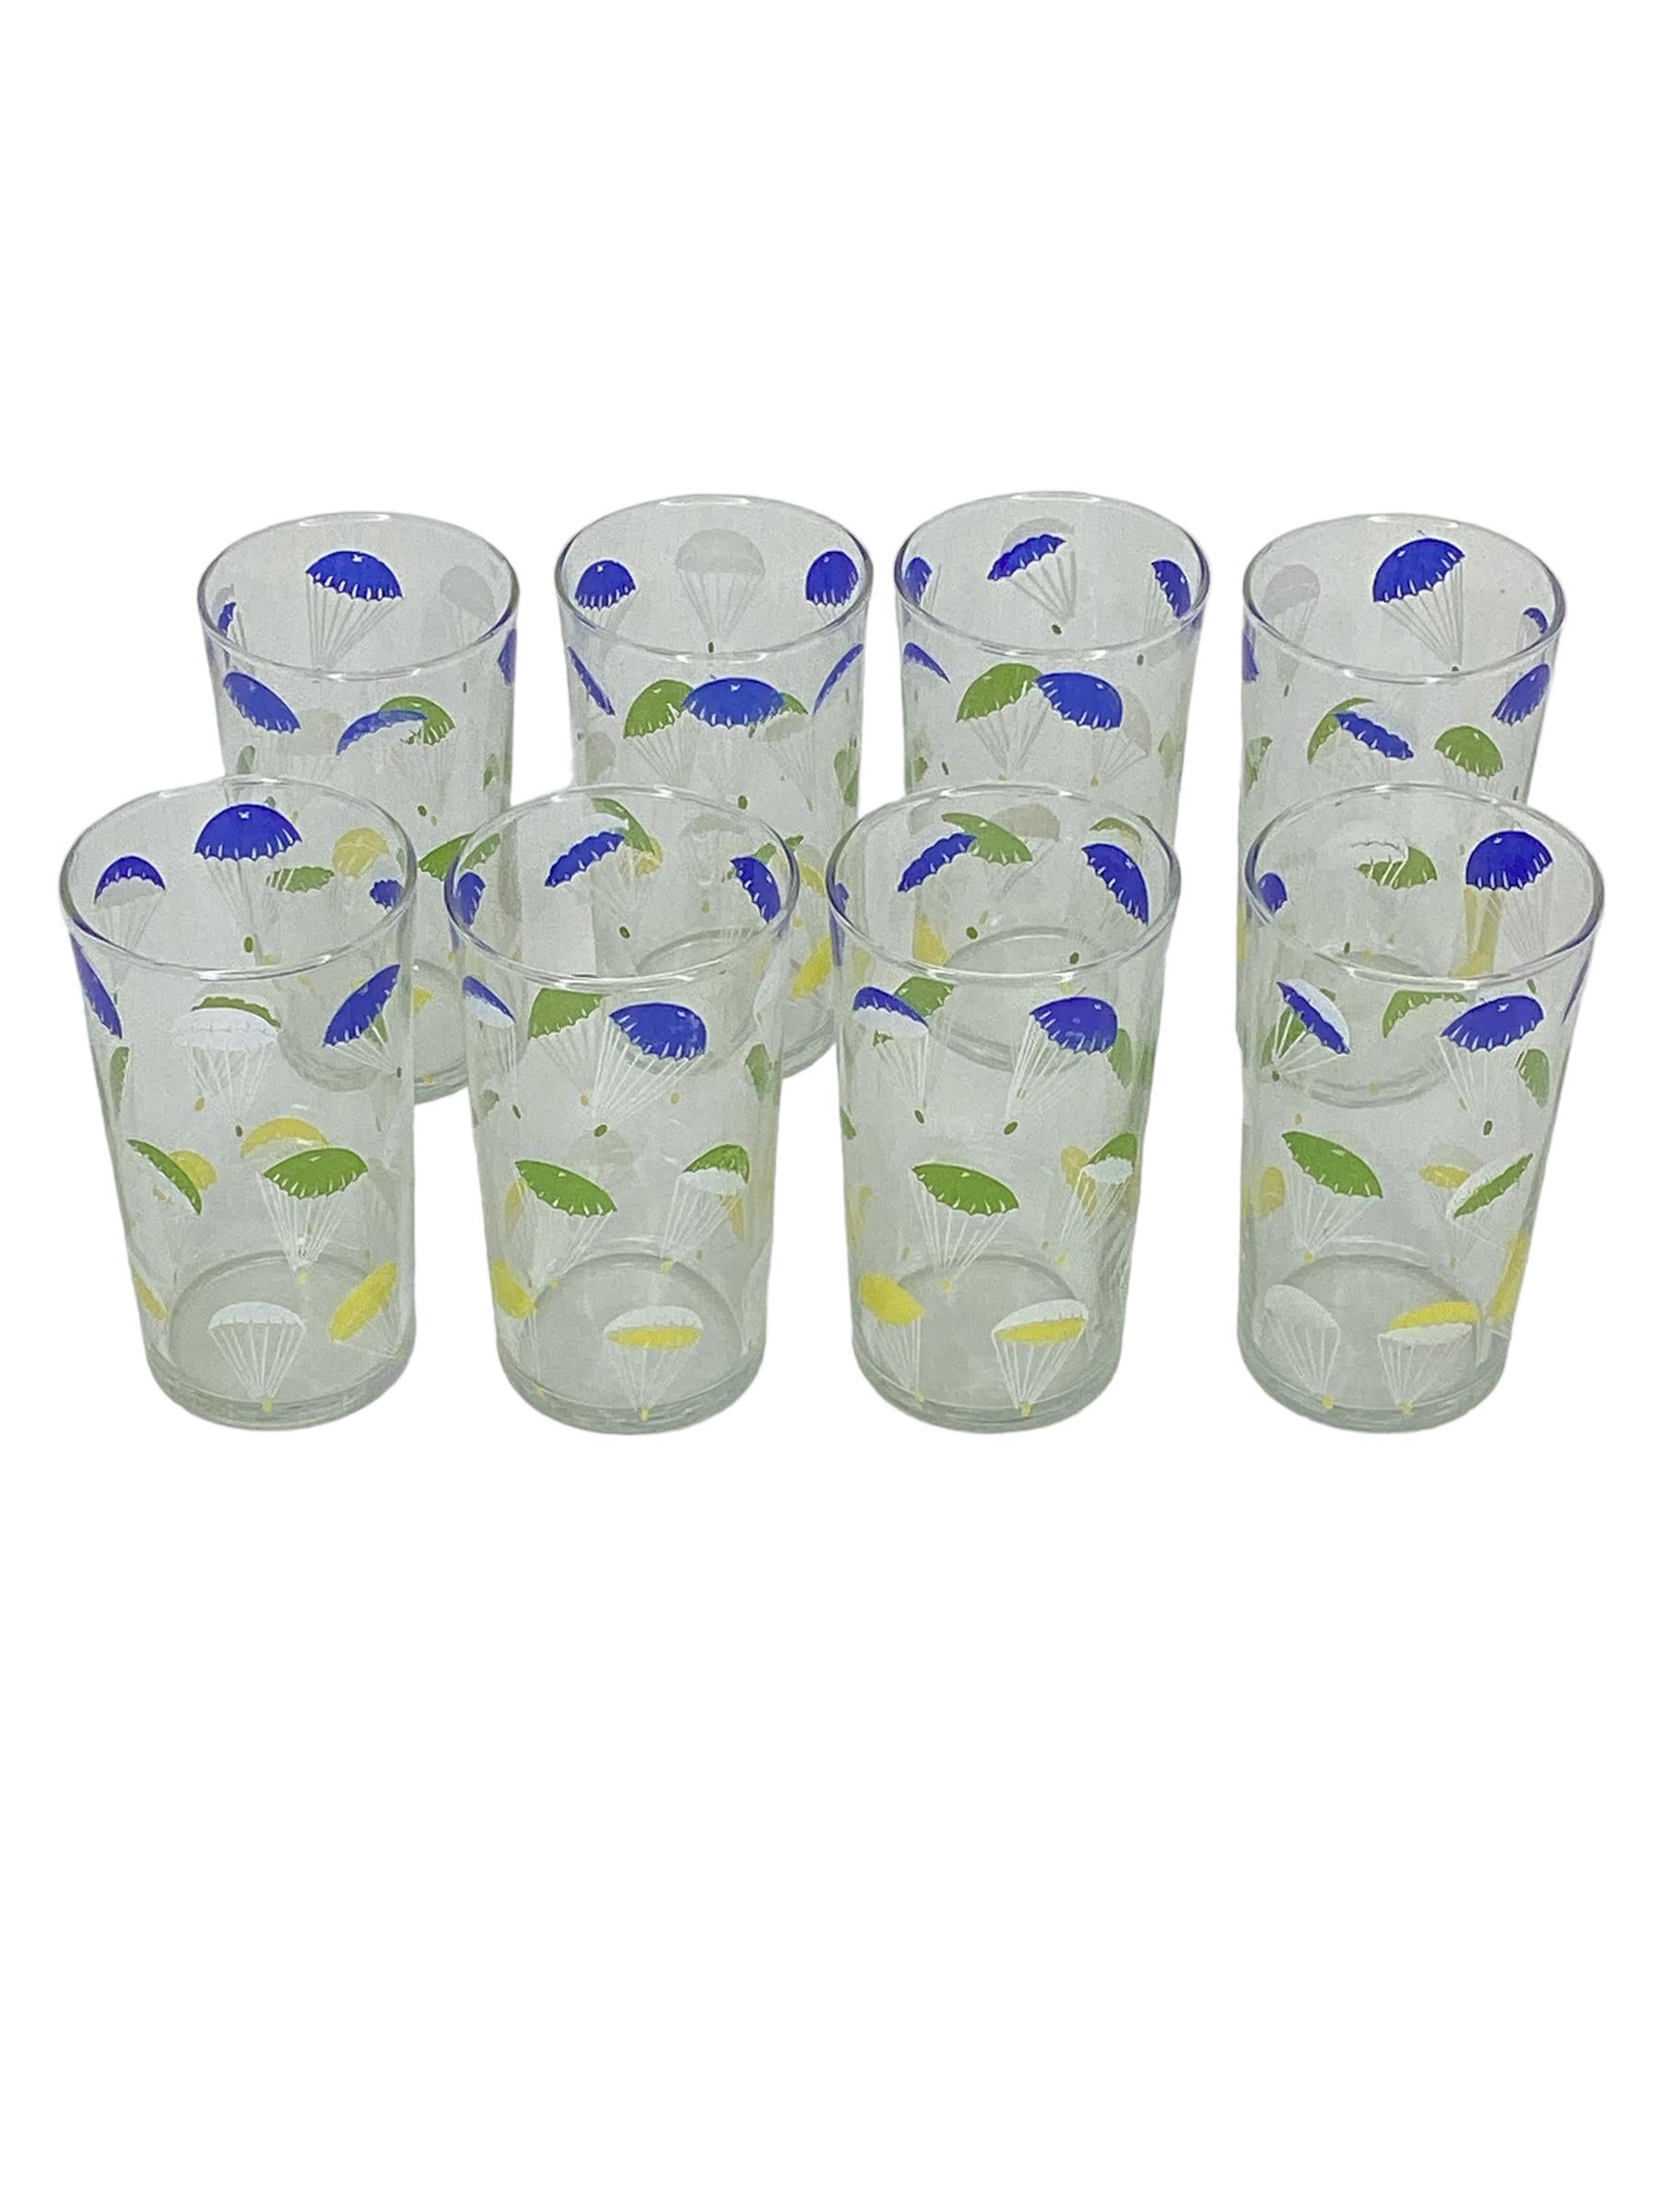 Set of 8 Vintage Tumblers with Parachute Design. Each glass decorated with floating parachutes in green, yellow, blue and white. A fun festive set.